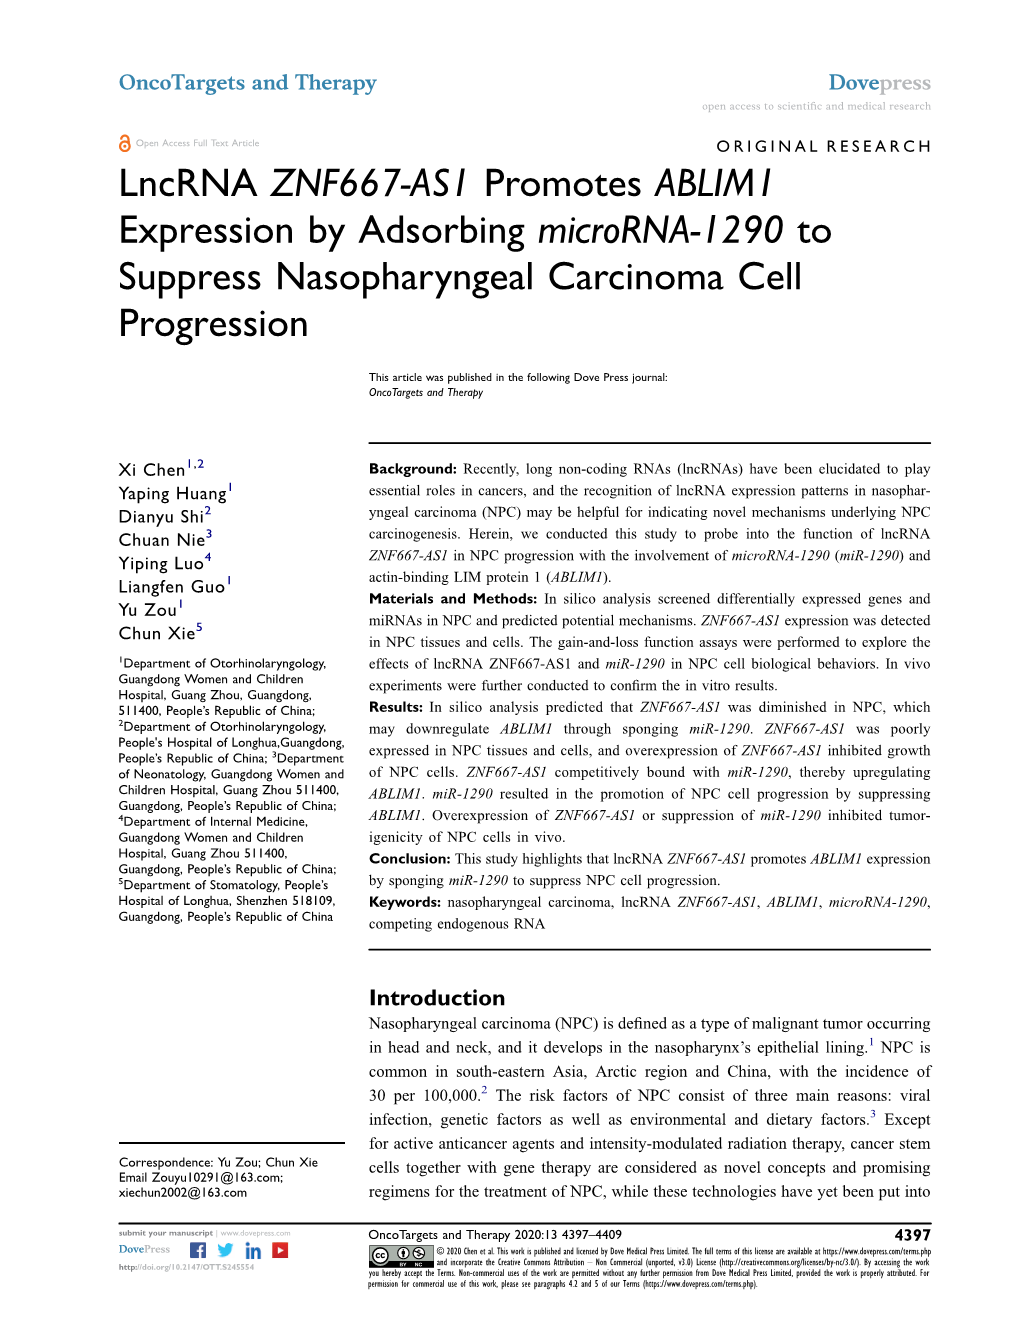 Lncrna ZNF667-AS1 Promotes ABLIM1 Expression by Adsorbing Microrna-1290 to Suppress Nasopharyngeal Carcinoma Cell Progression